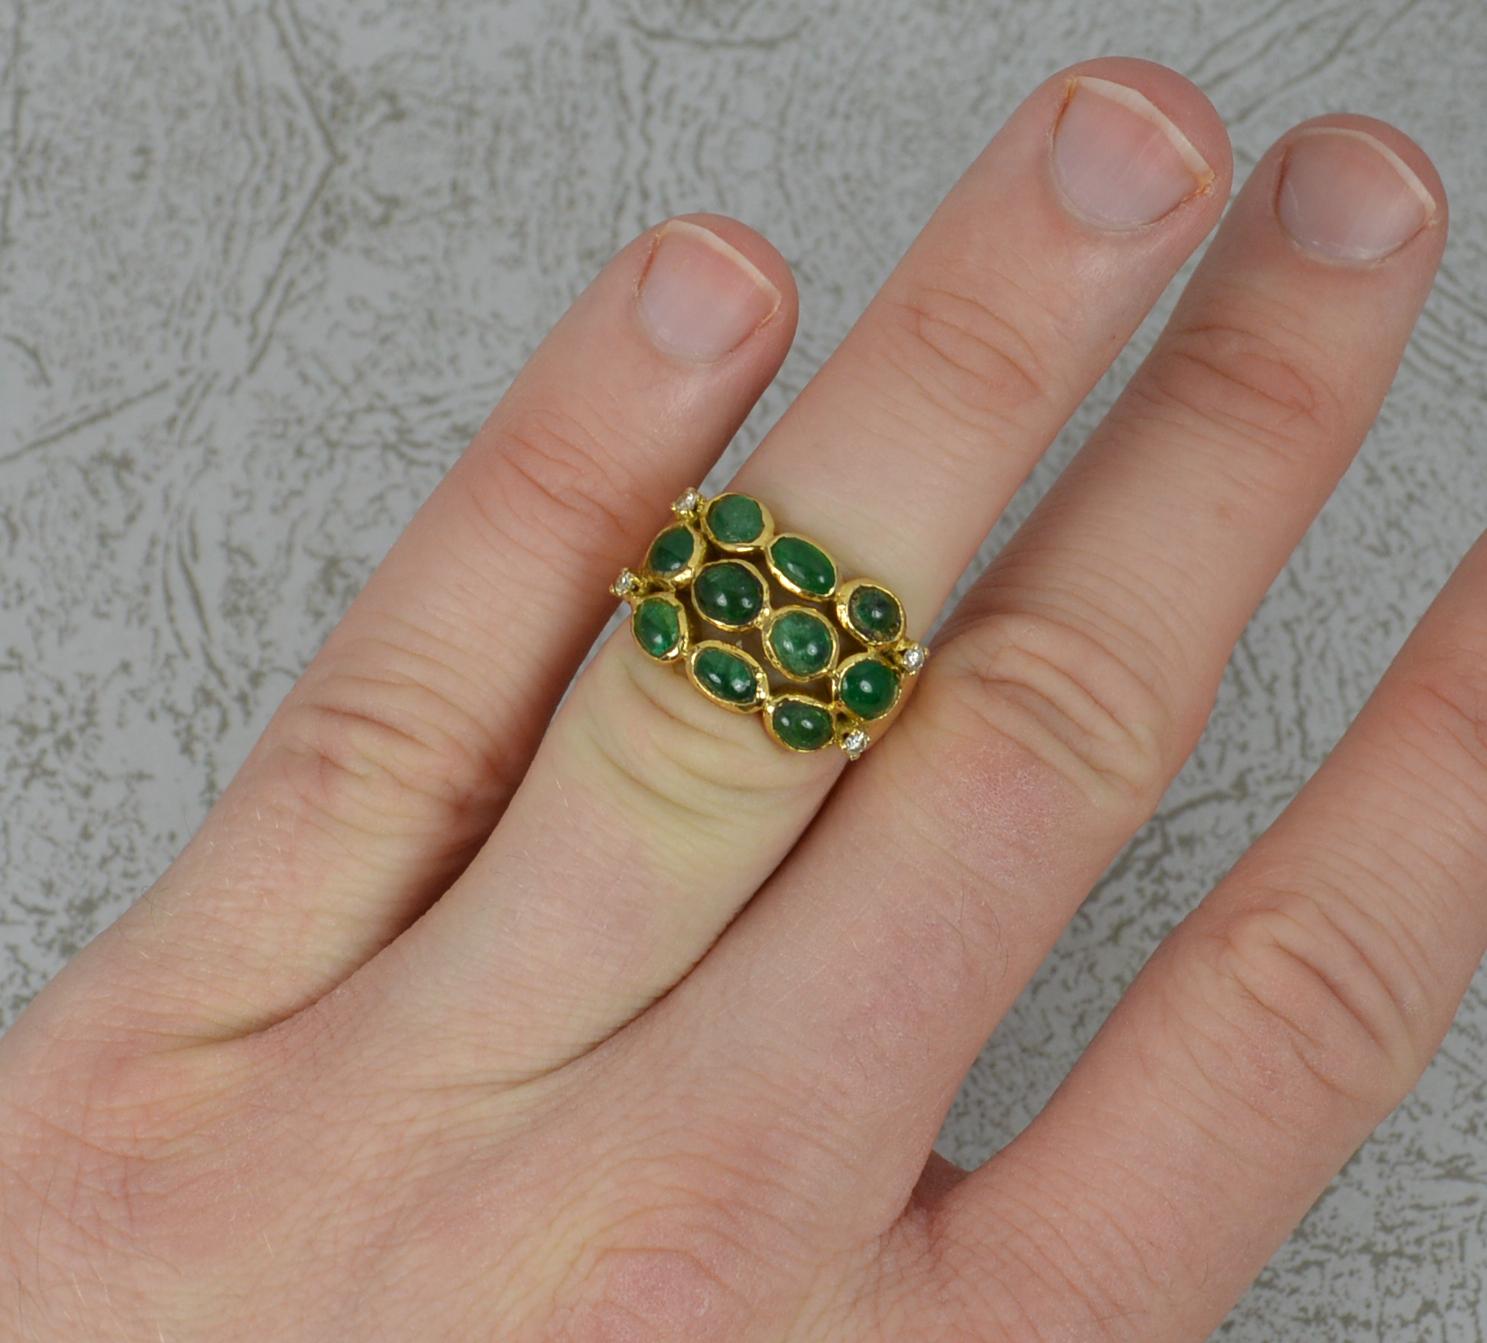 A superb vintage cluster ring.
Solid 18 carat yellow gold example.
Set with ten natural round and oval shaped emerald cabochon stones with four small diamonds. 2.65 carats of emerald in total.
20mm x 13mm cluster head.

CONDITION ; Good for age.